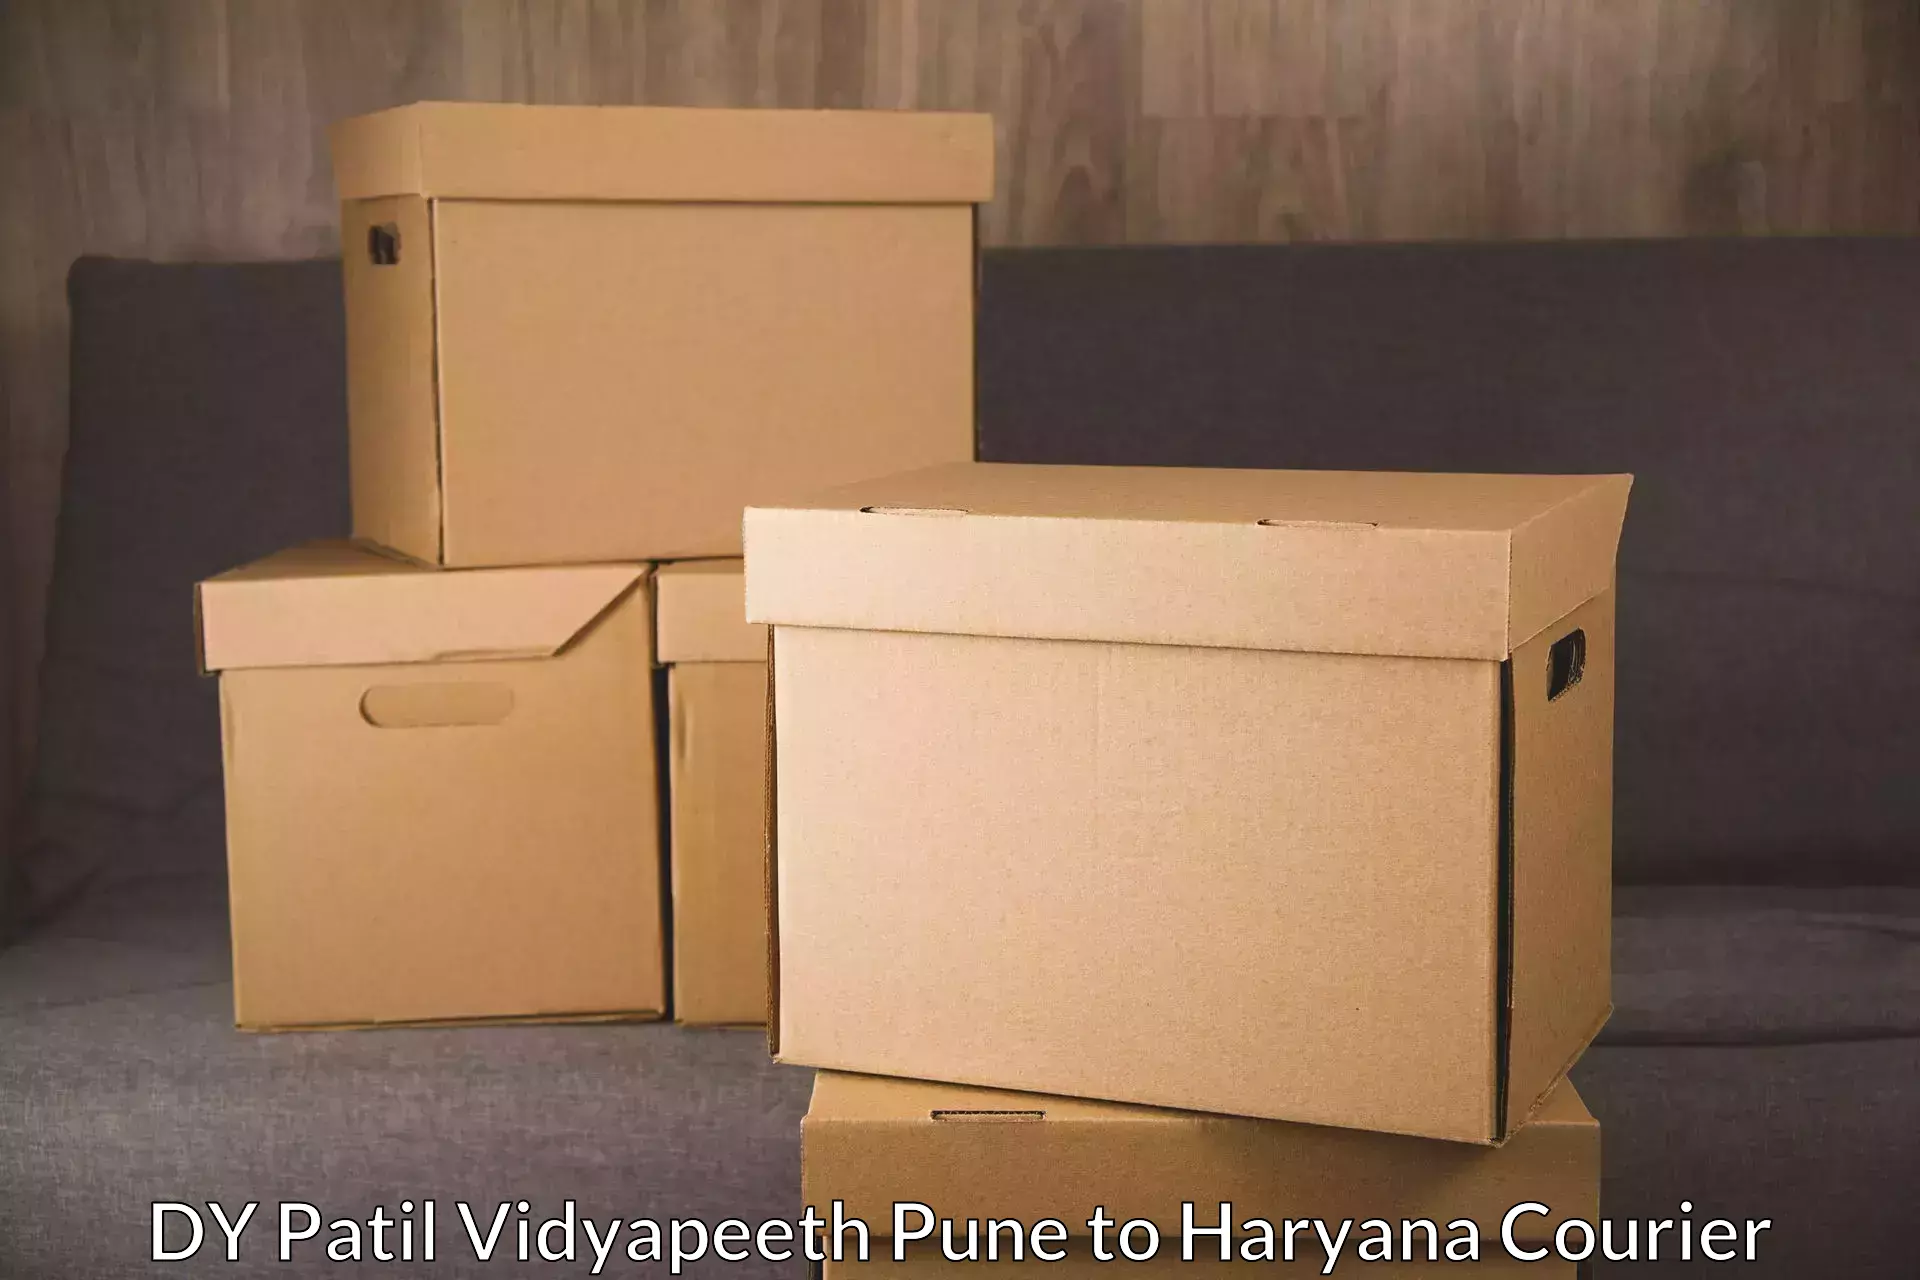 Efficient shipping operations in DY Patil Vidyapeeth Pune to Faridabad